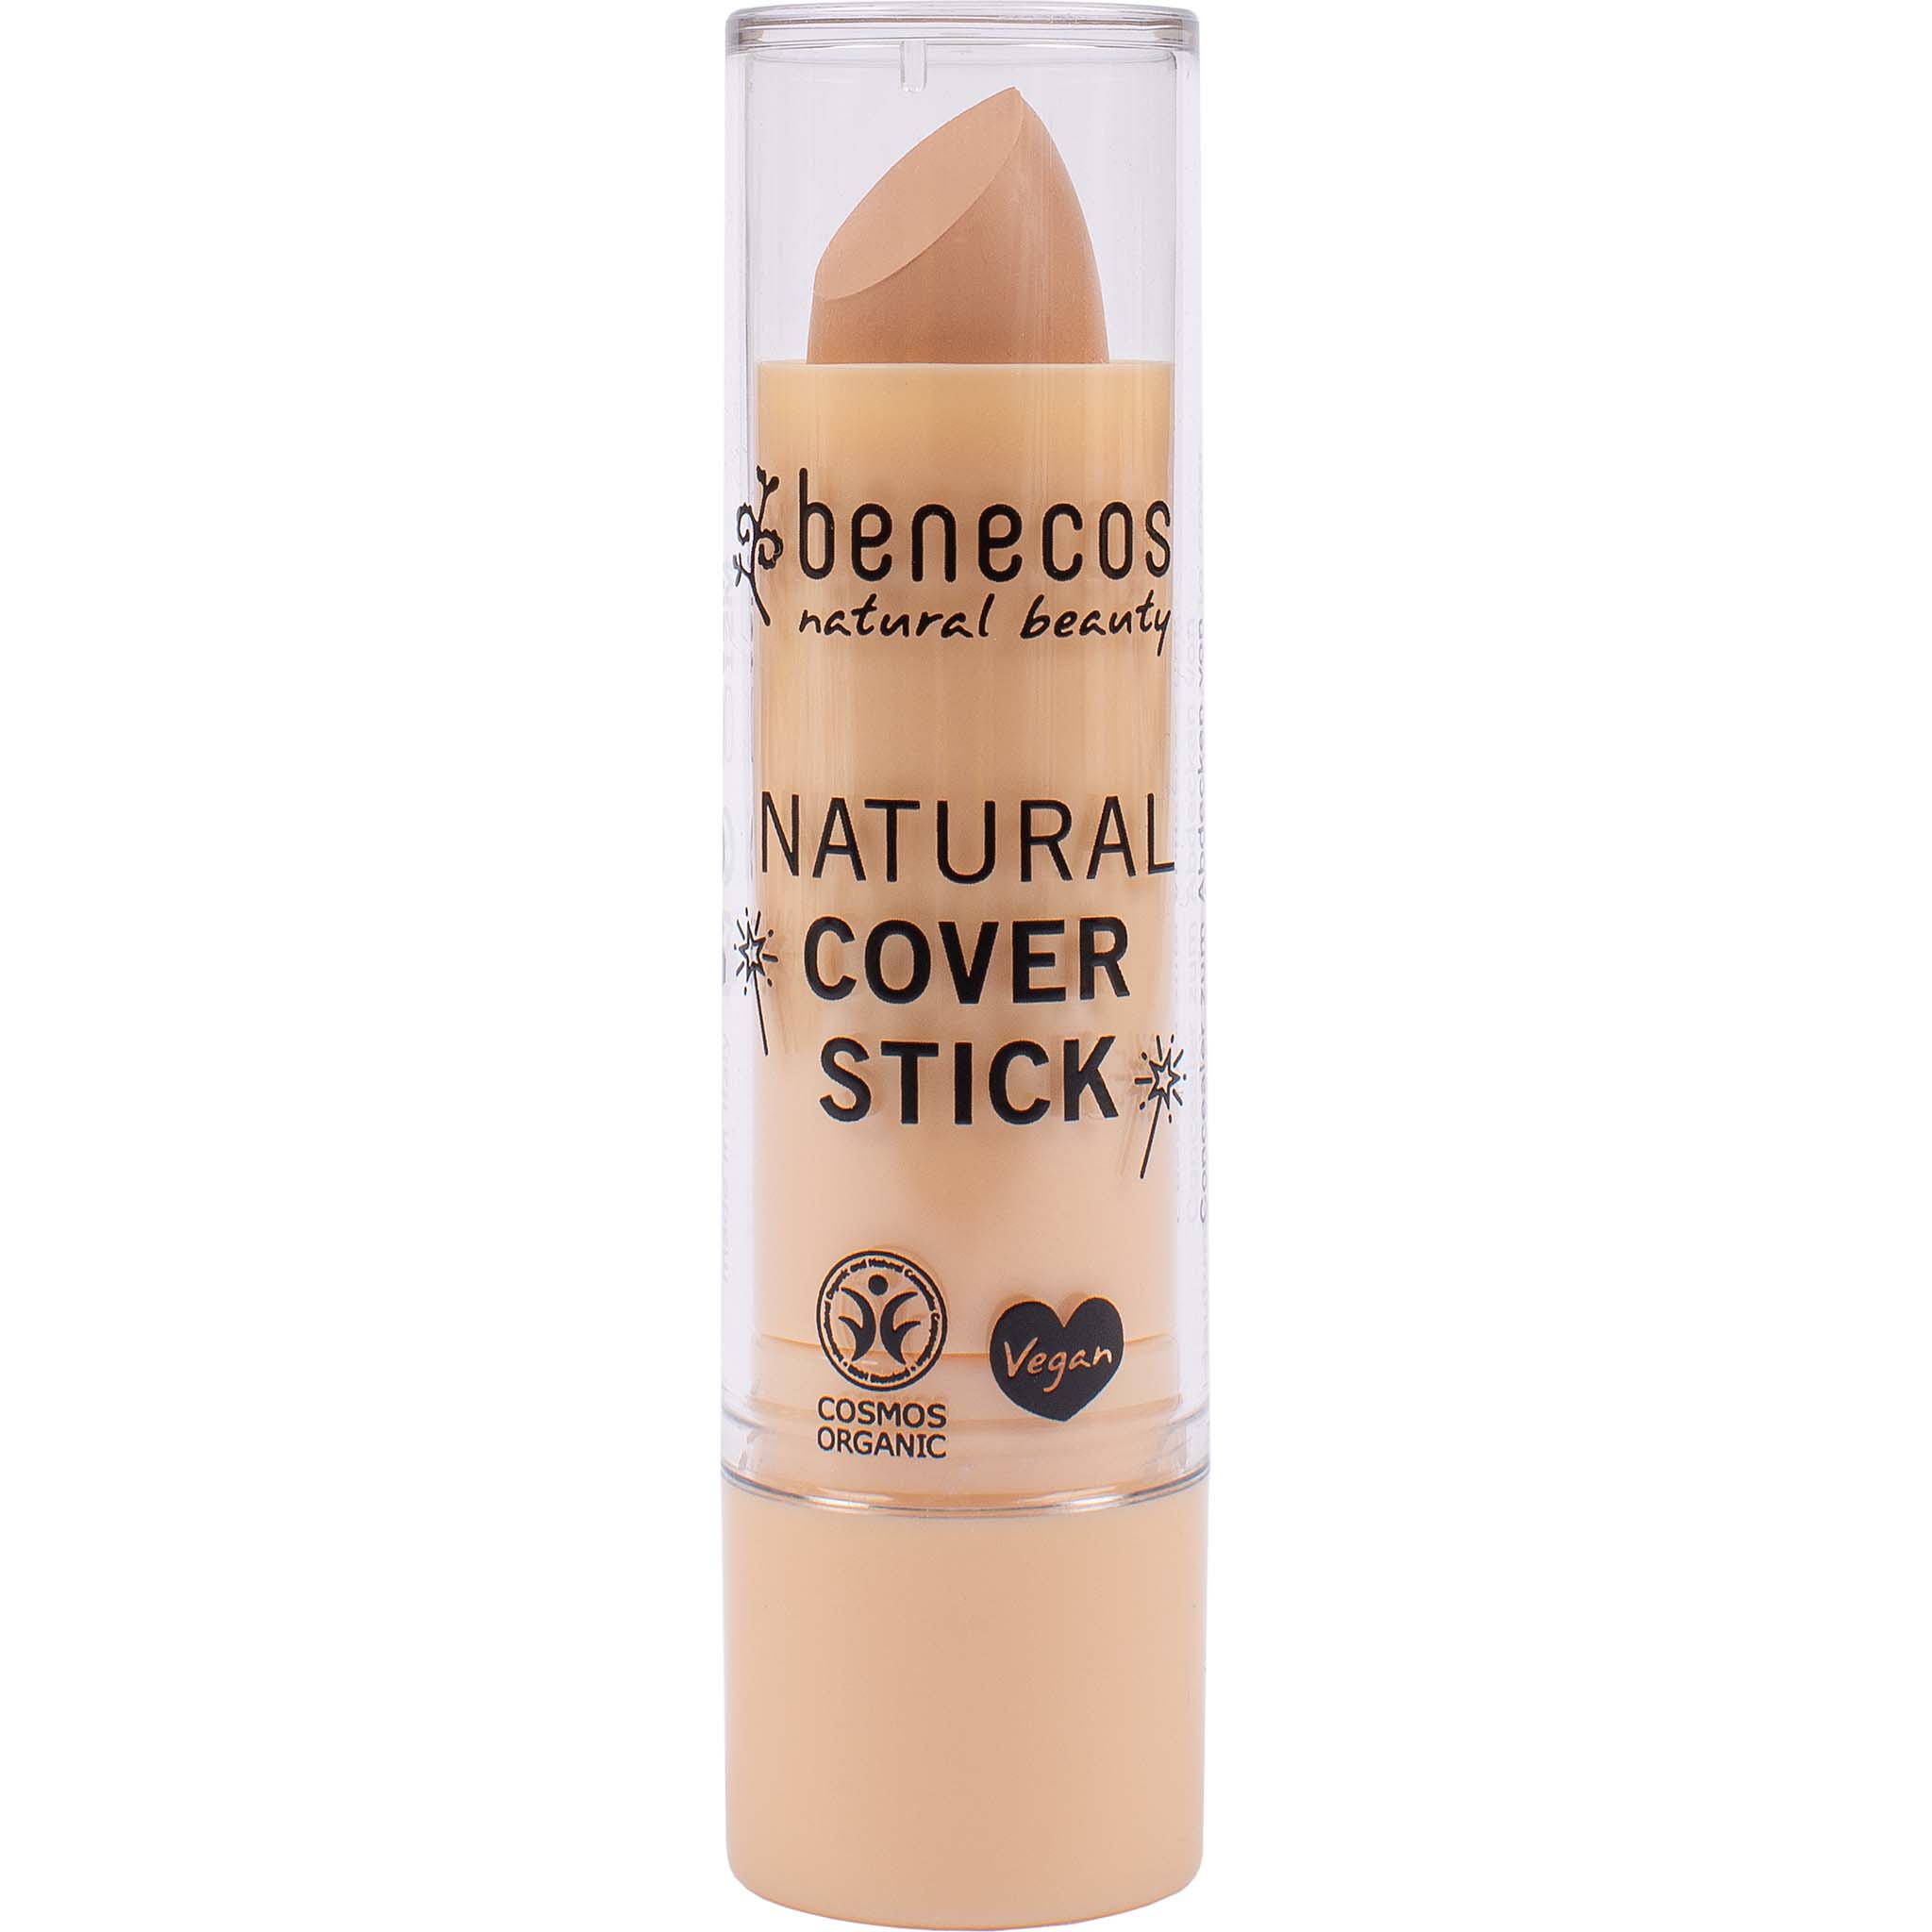 Natural Cover Stick - mypure.co.uk